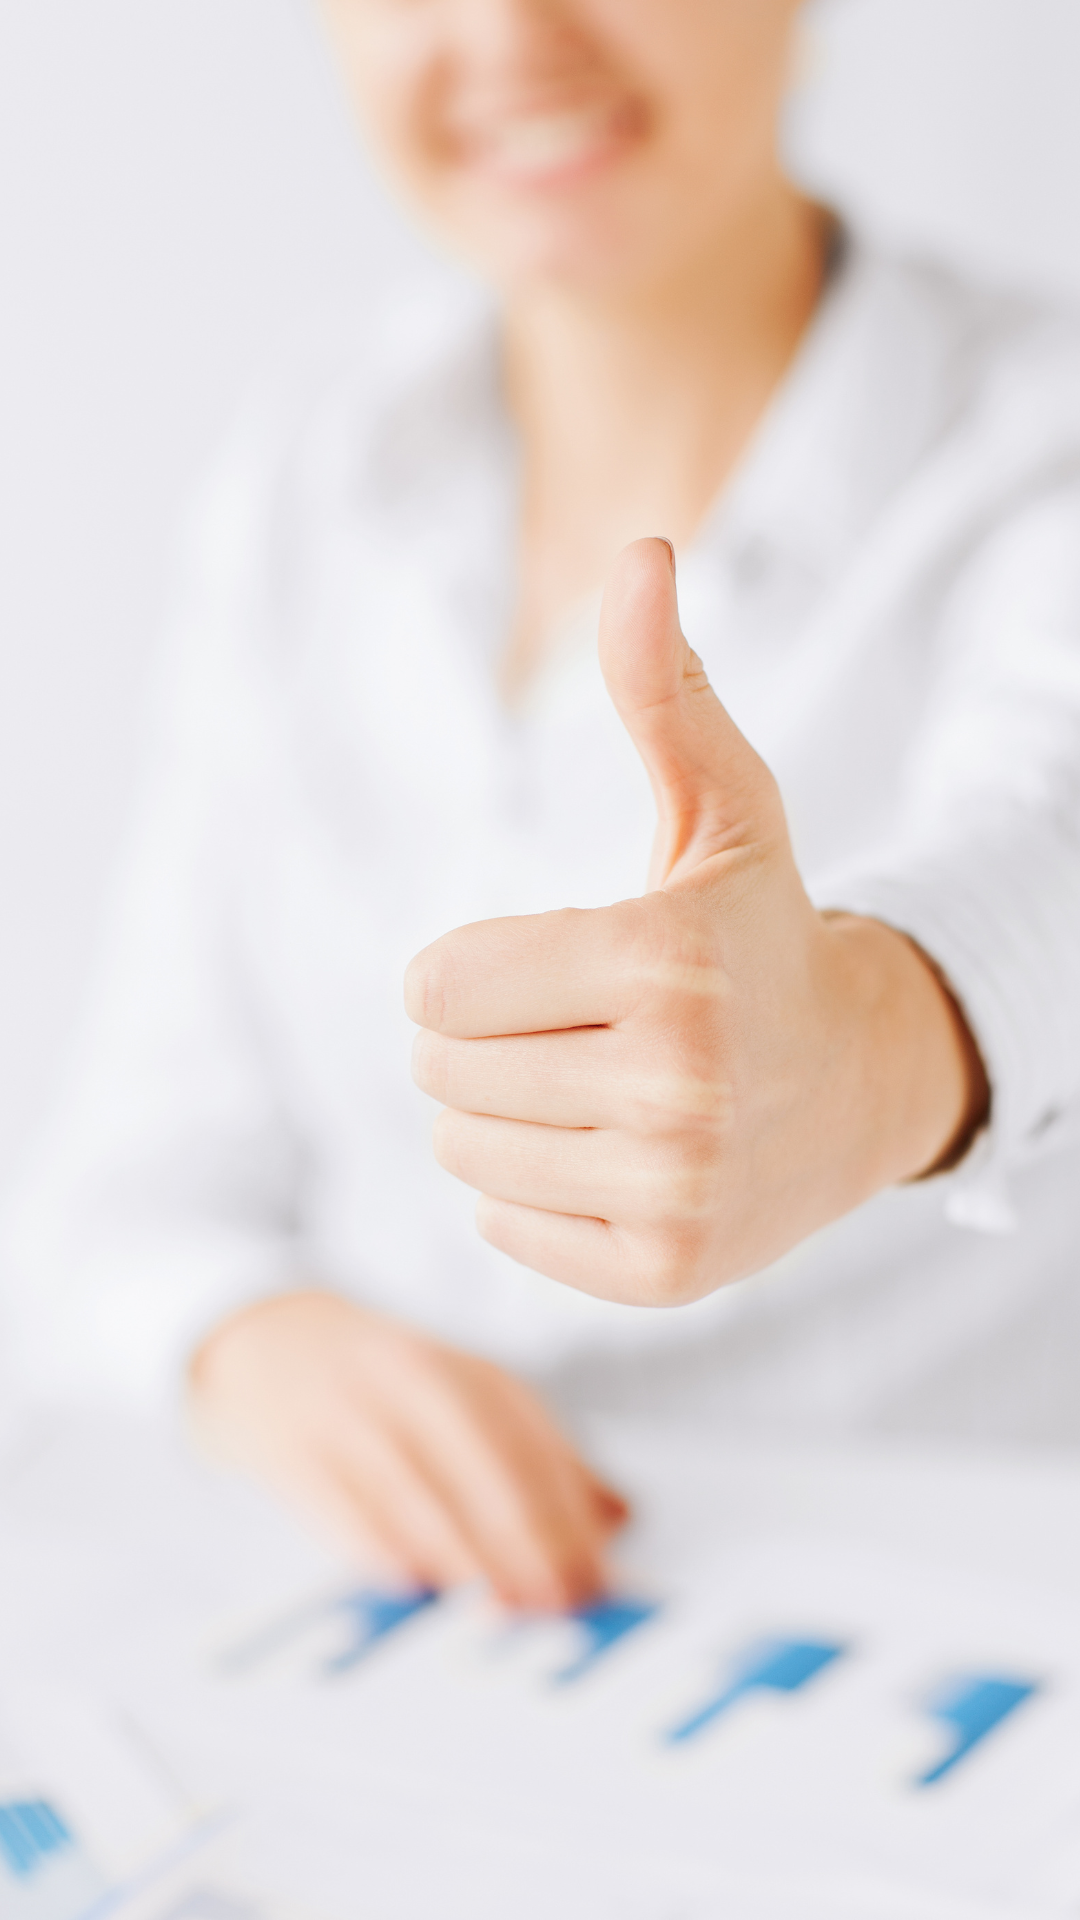 Woman smiling, wearing a white button down shirt sits with graphs on the table in front of her, all blurred, gives a thumbs up in the forefront of the frame